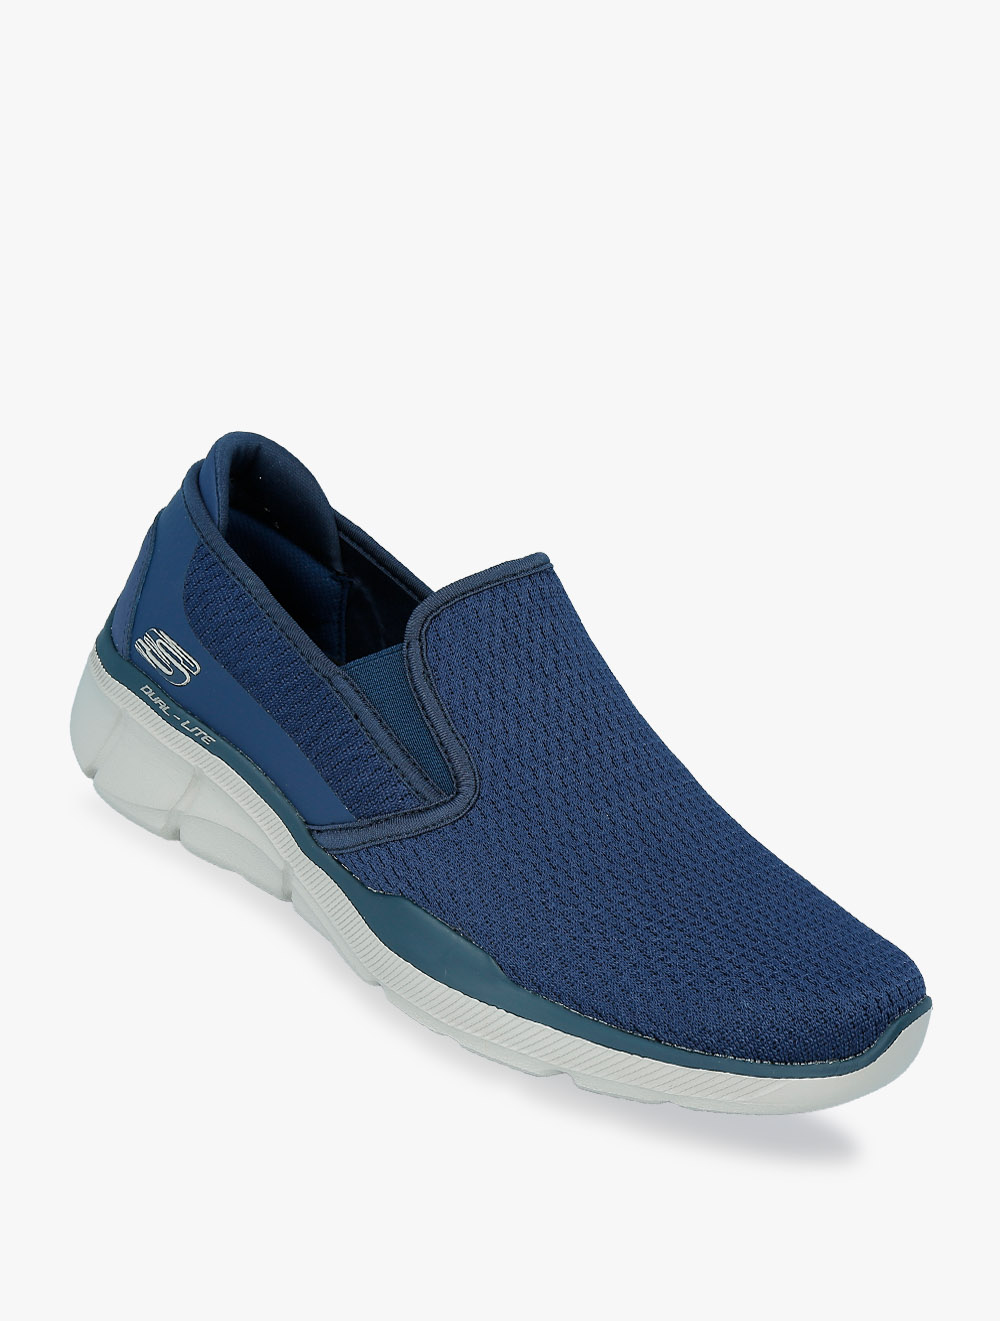 skechers relaxed fit mens blue